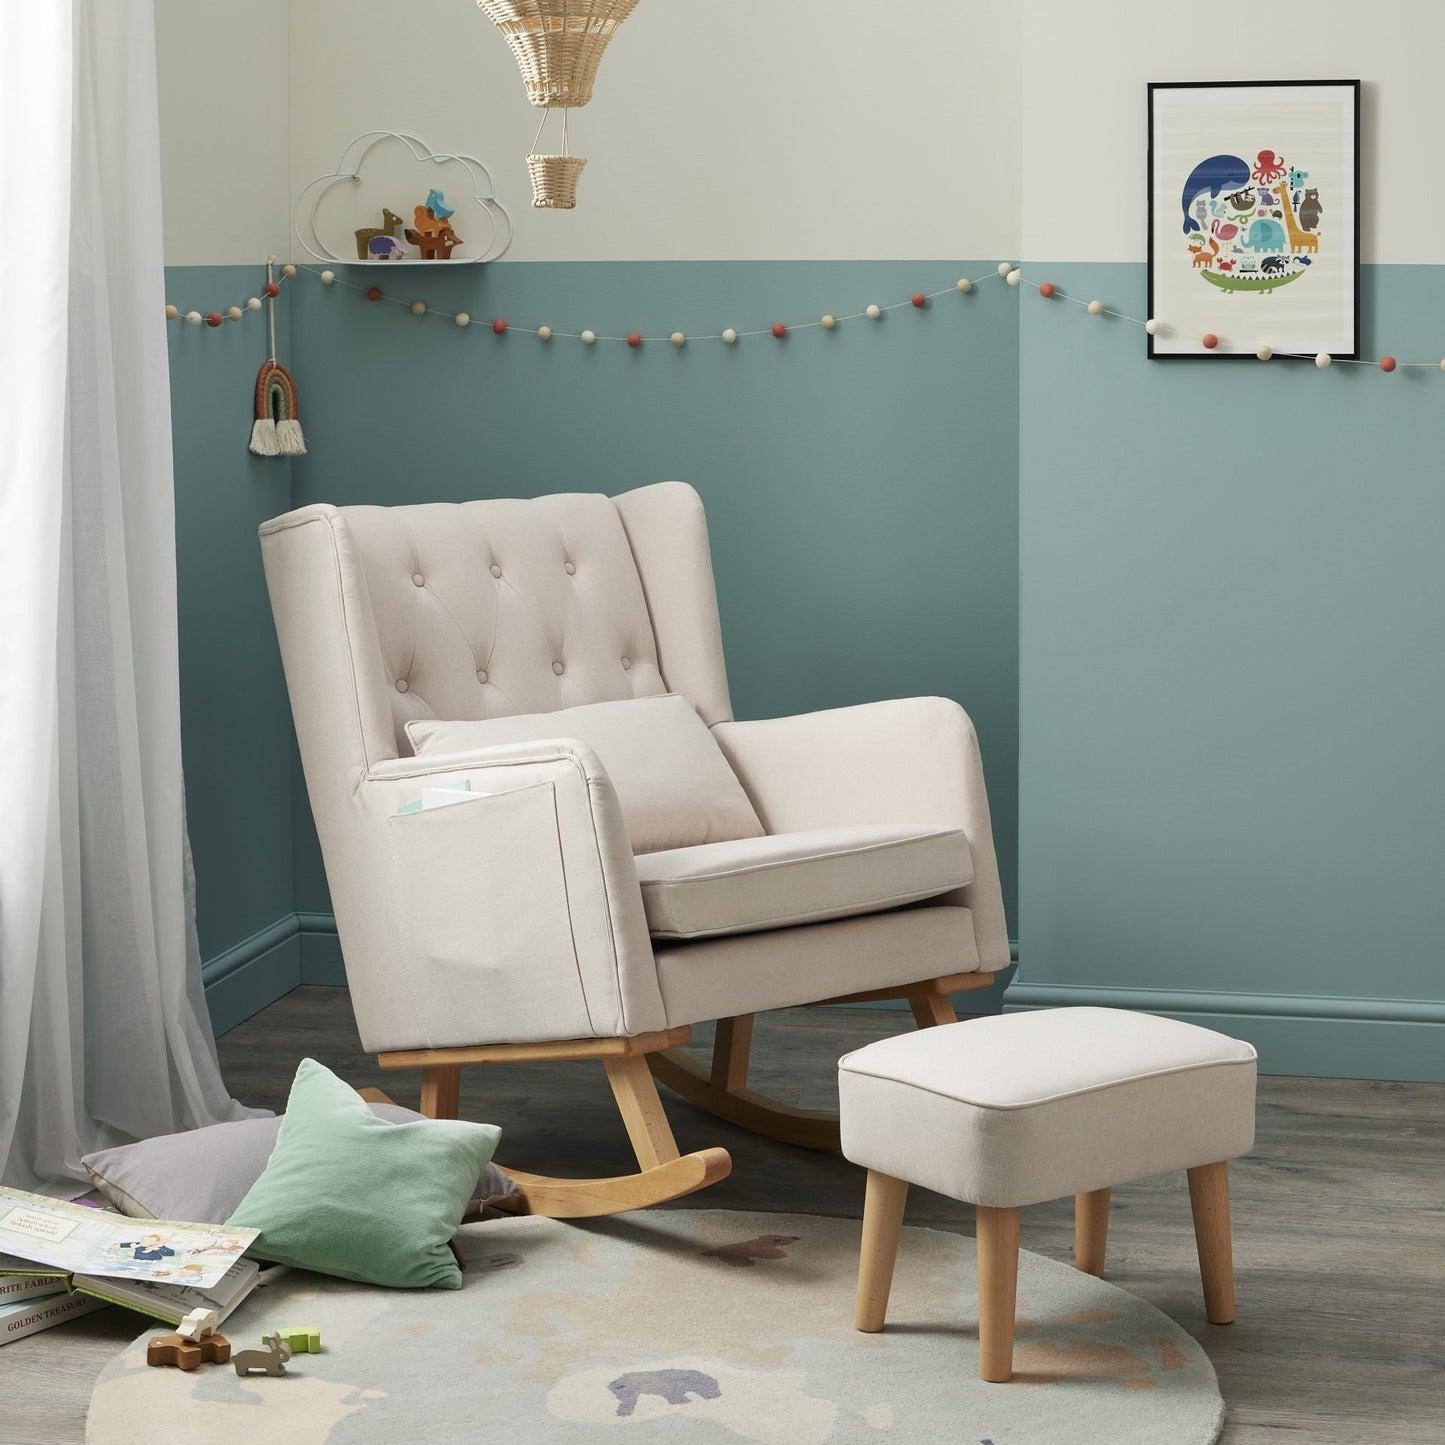 Babymore Lux Nursing Chair with Footstool – Cream SALE